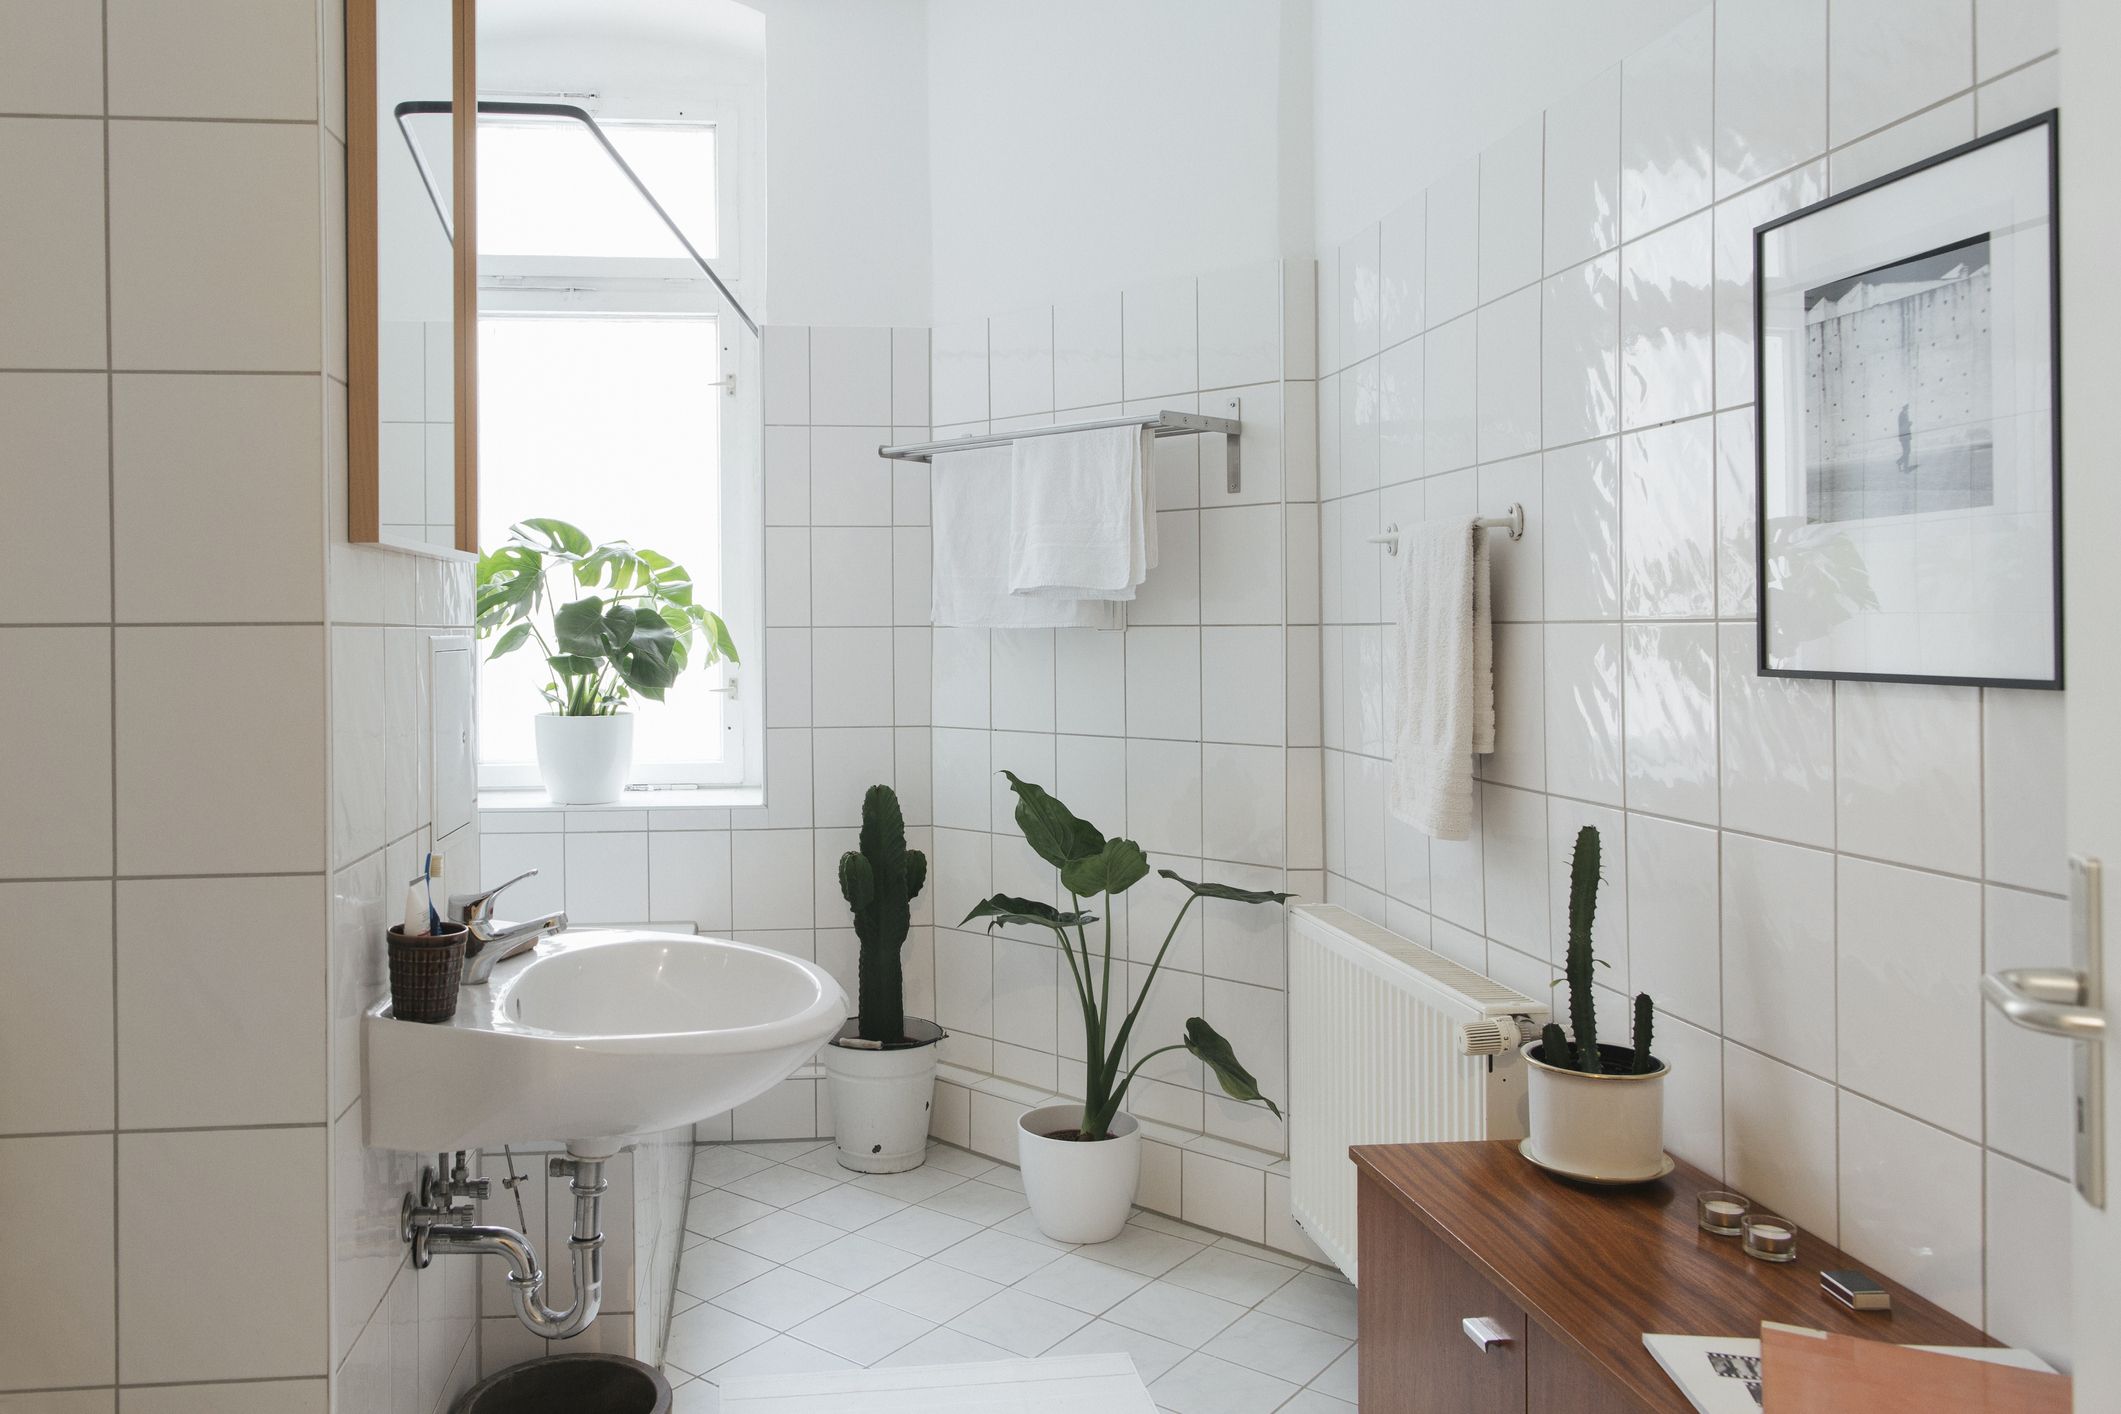 How to deep clean your bathroom, tips and tricks from the GHI